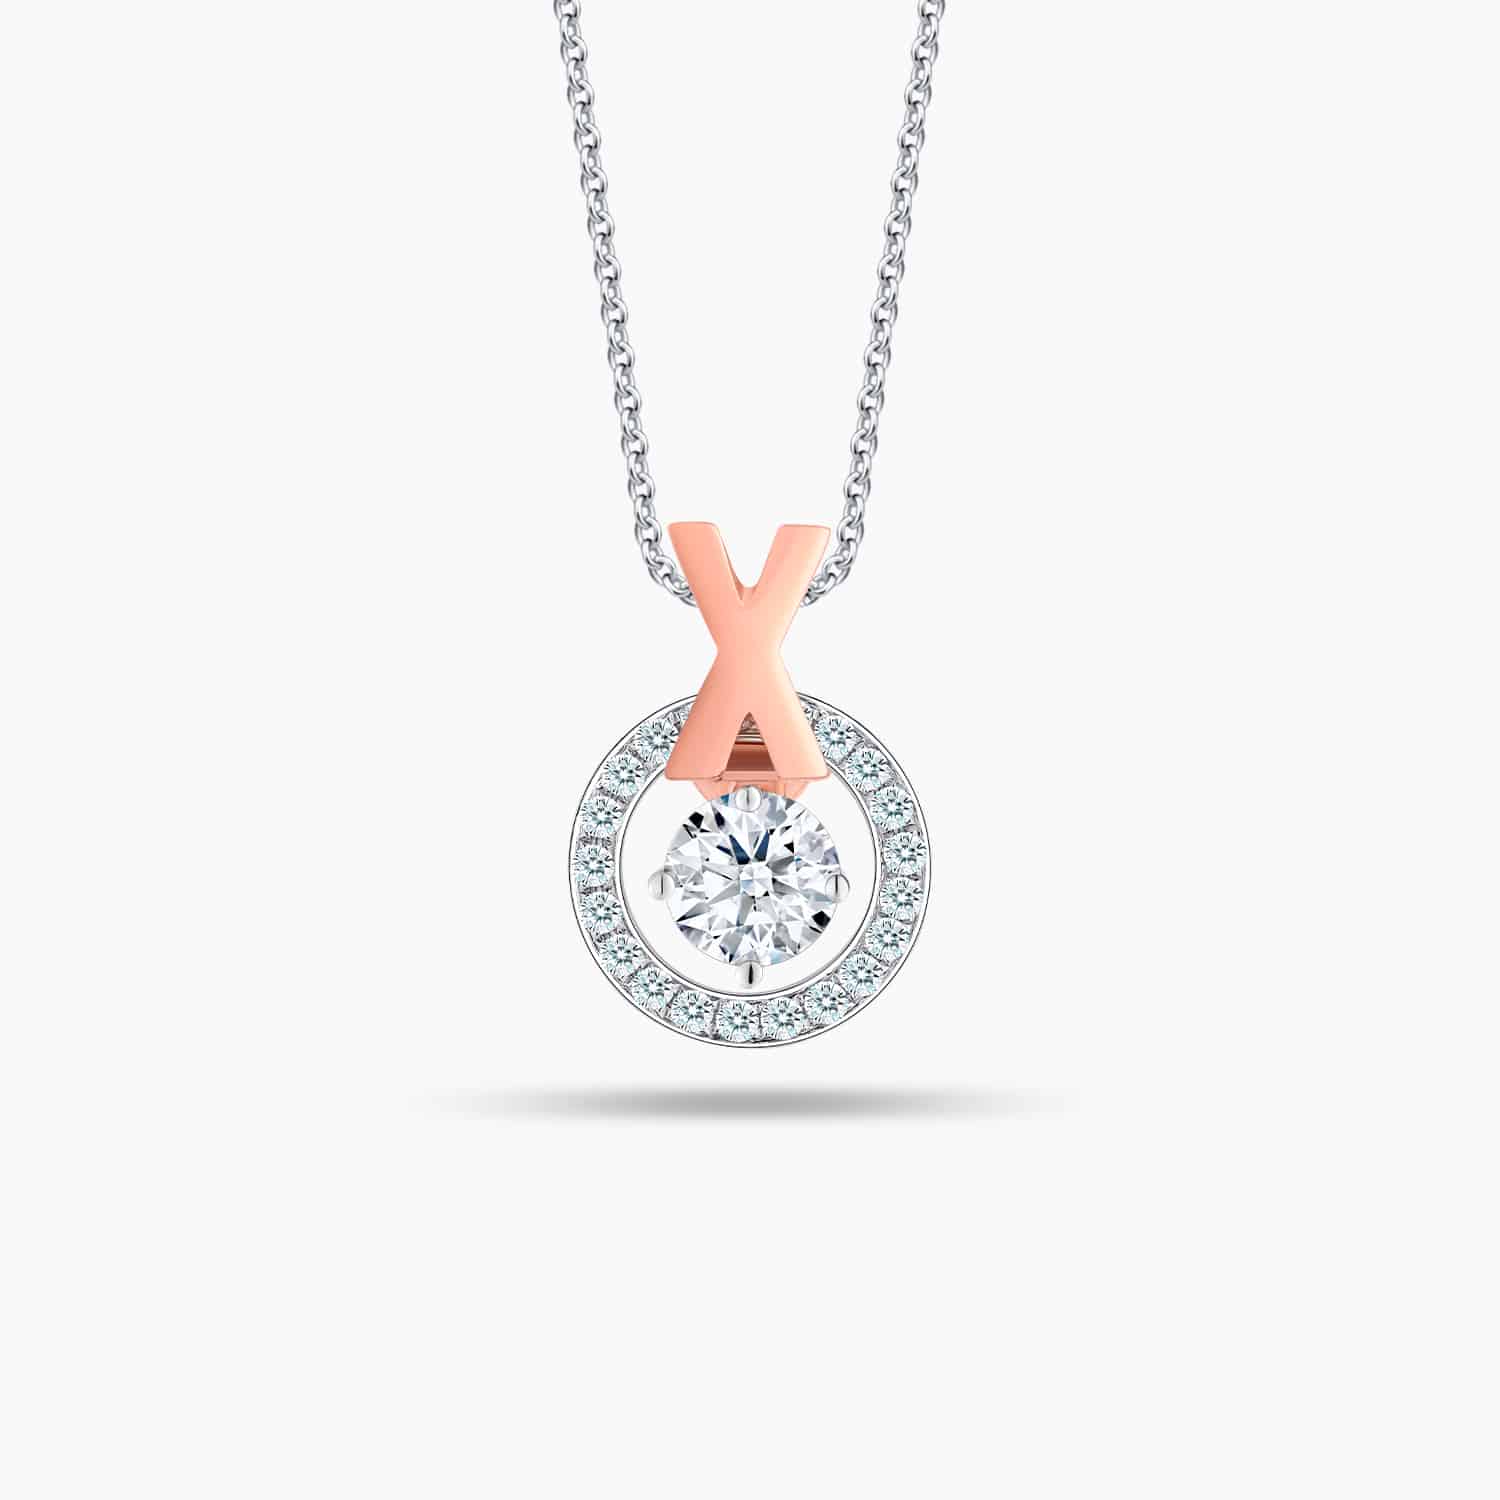 LVC Joie Diamond Pendant "X" in 18k white gold & rose gold. Pair with 10K White Gold necklace chain. 10th year anniversary gift